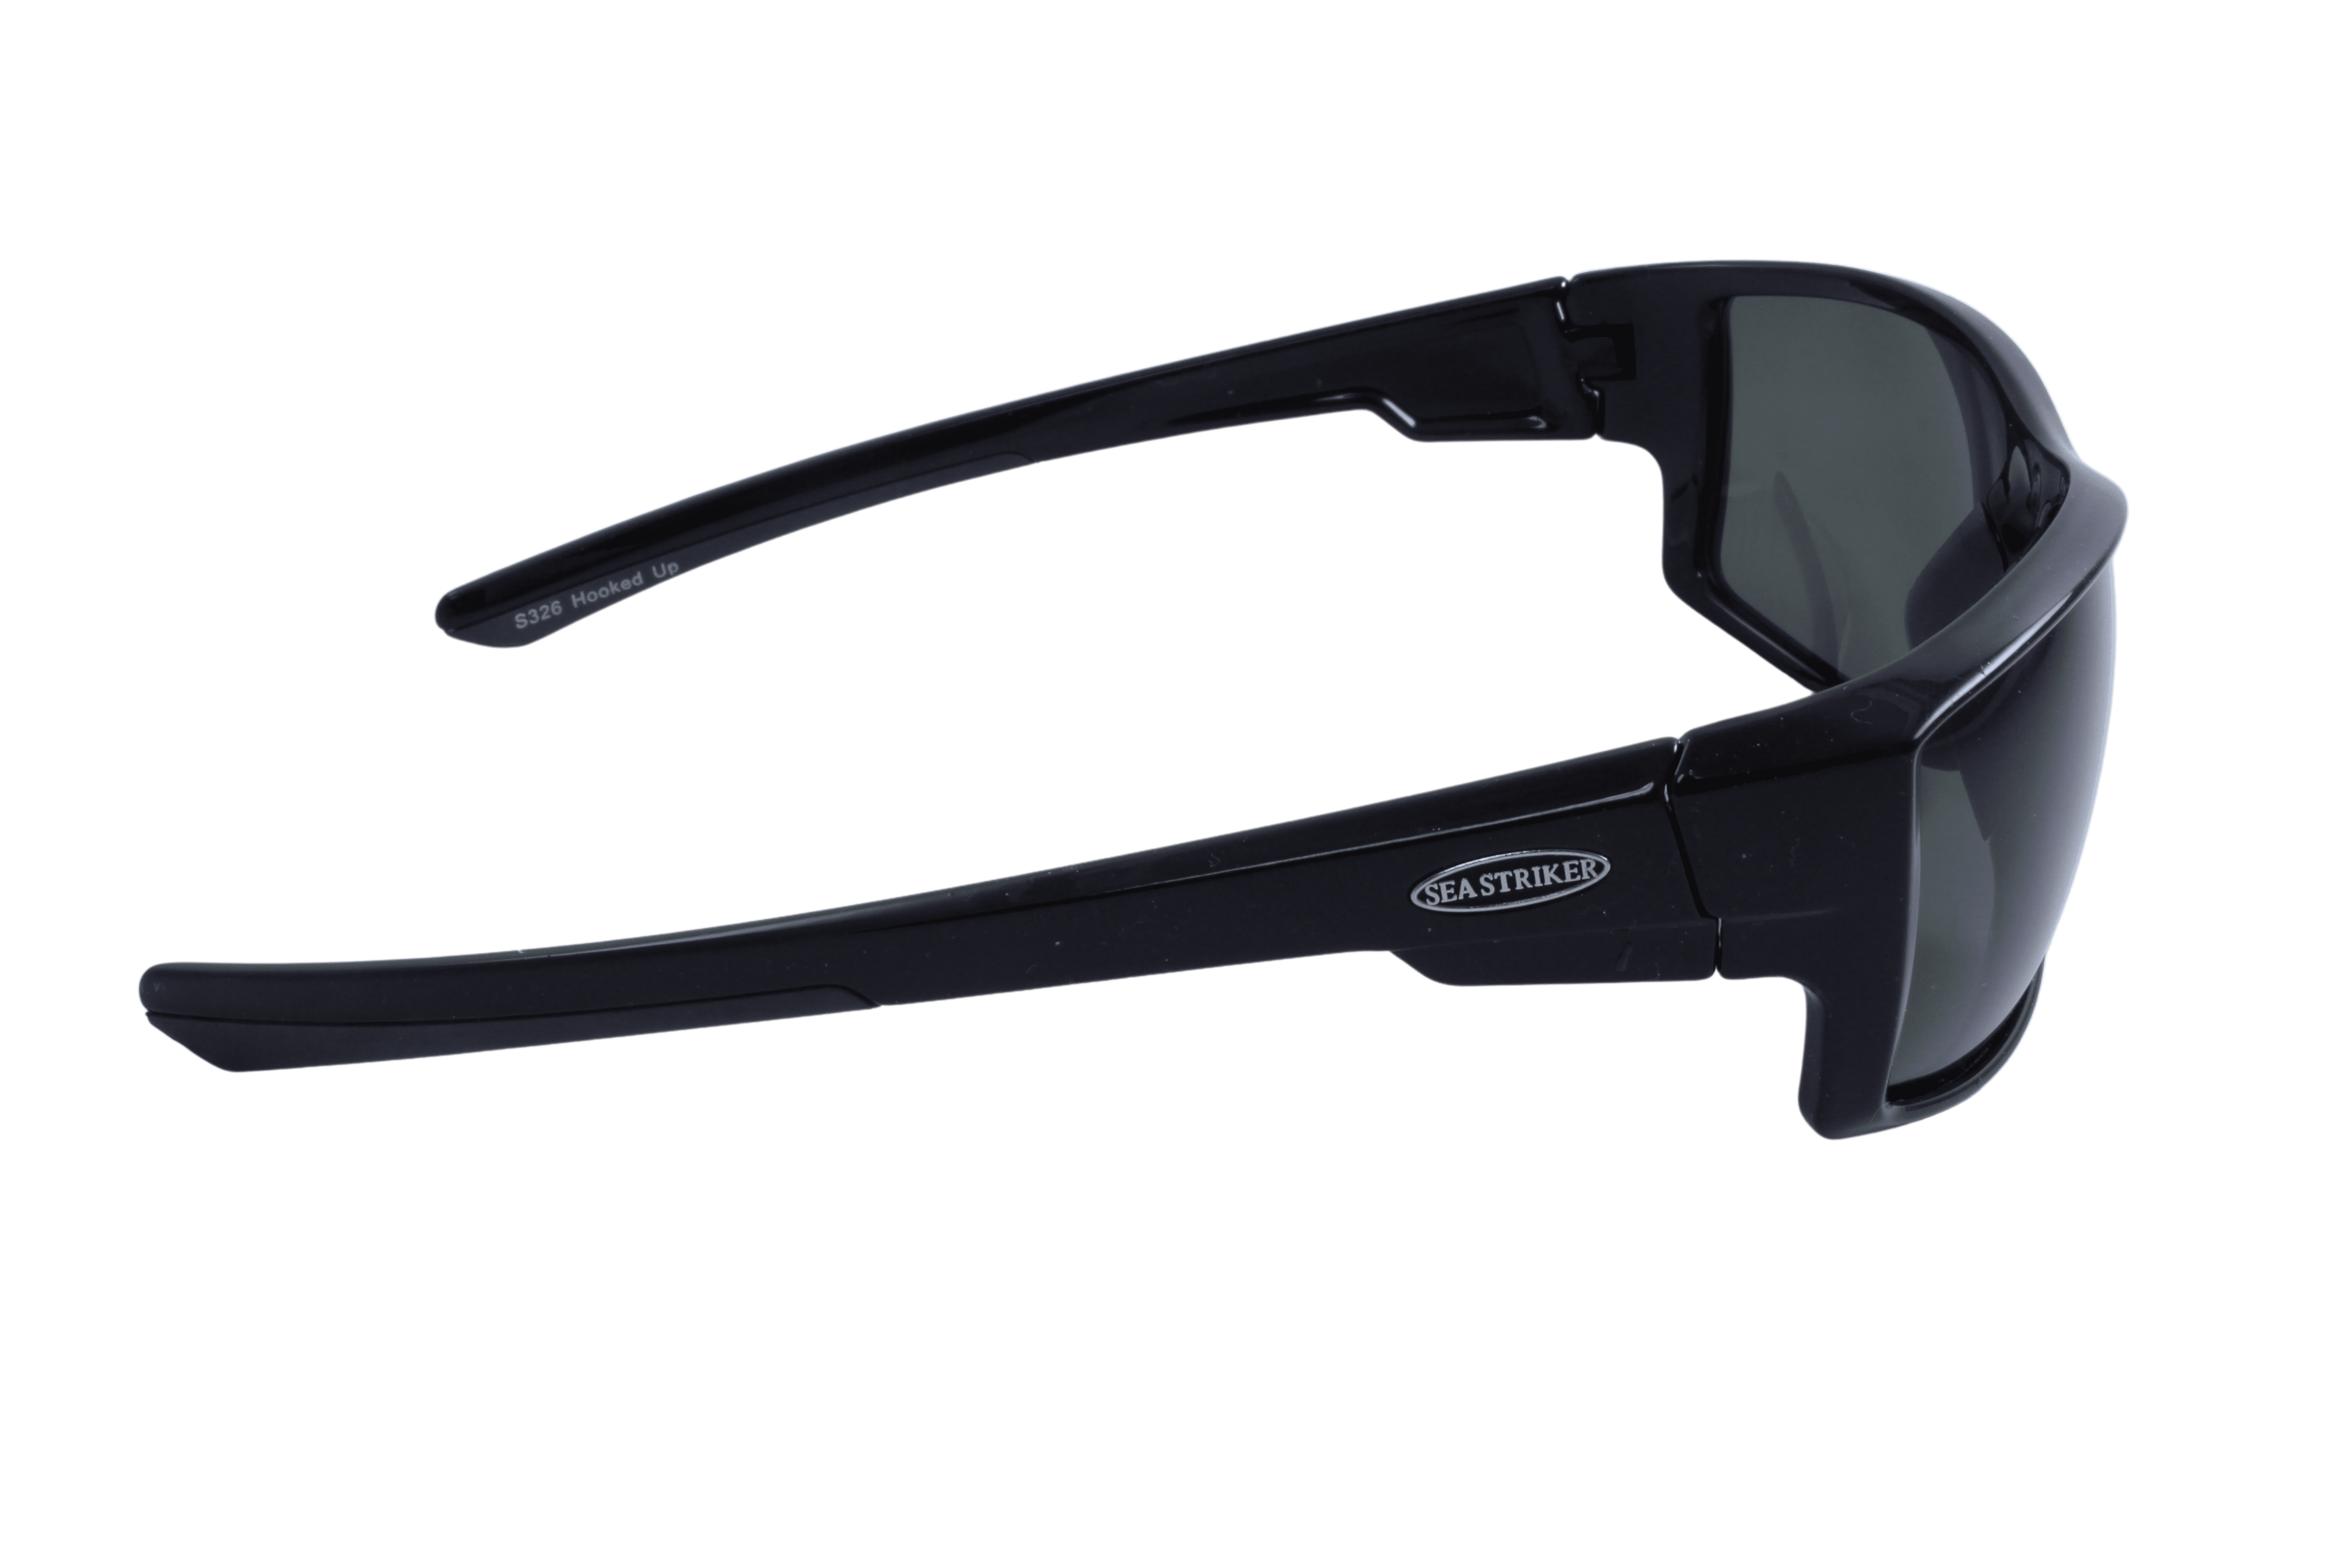  Sea Striker Pursuit Polarized Sunglasses with Black Frame and  Grey Lens (Fits Medium to Large Faces) : Clothing, Shoes & Jewelry